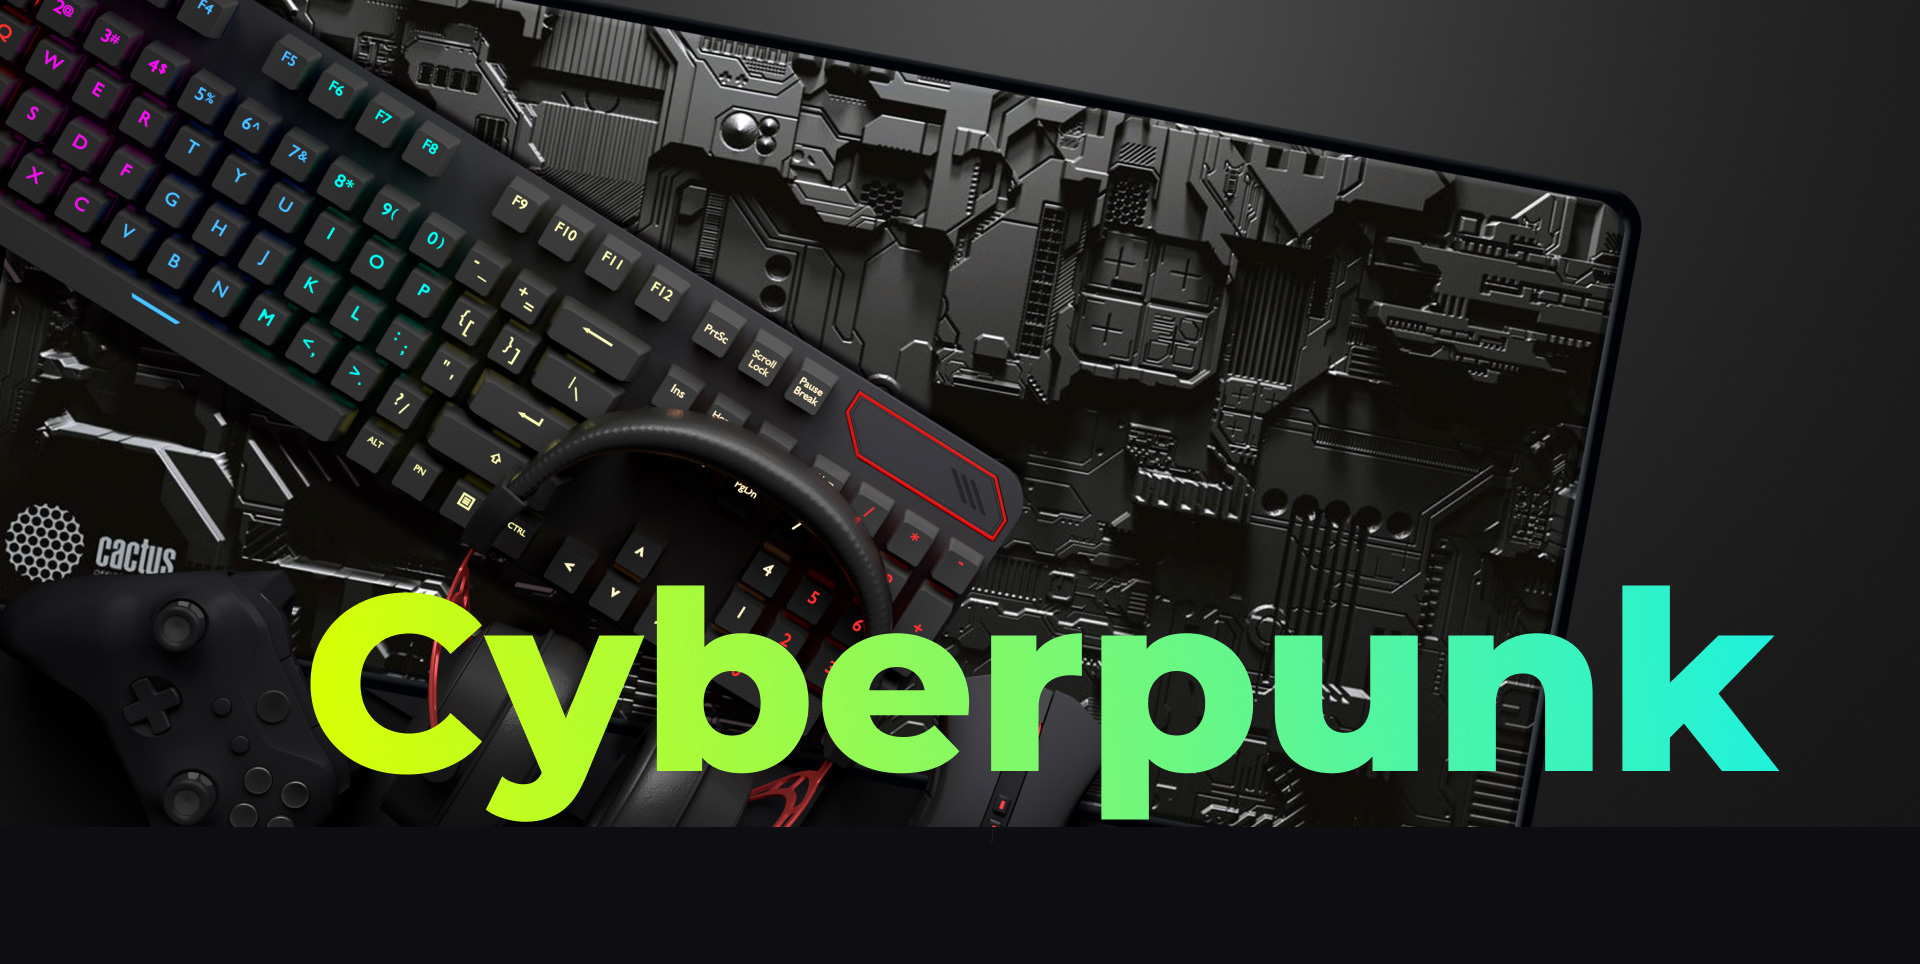 gaming/products/gaming/mousepad/cyberpunk.jpg